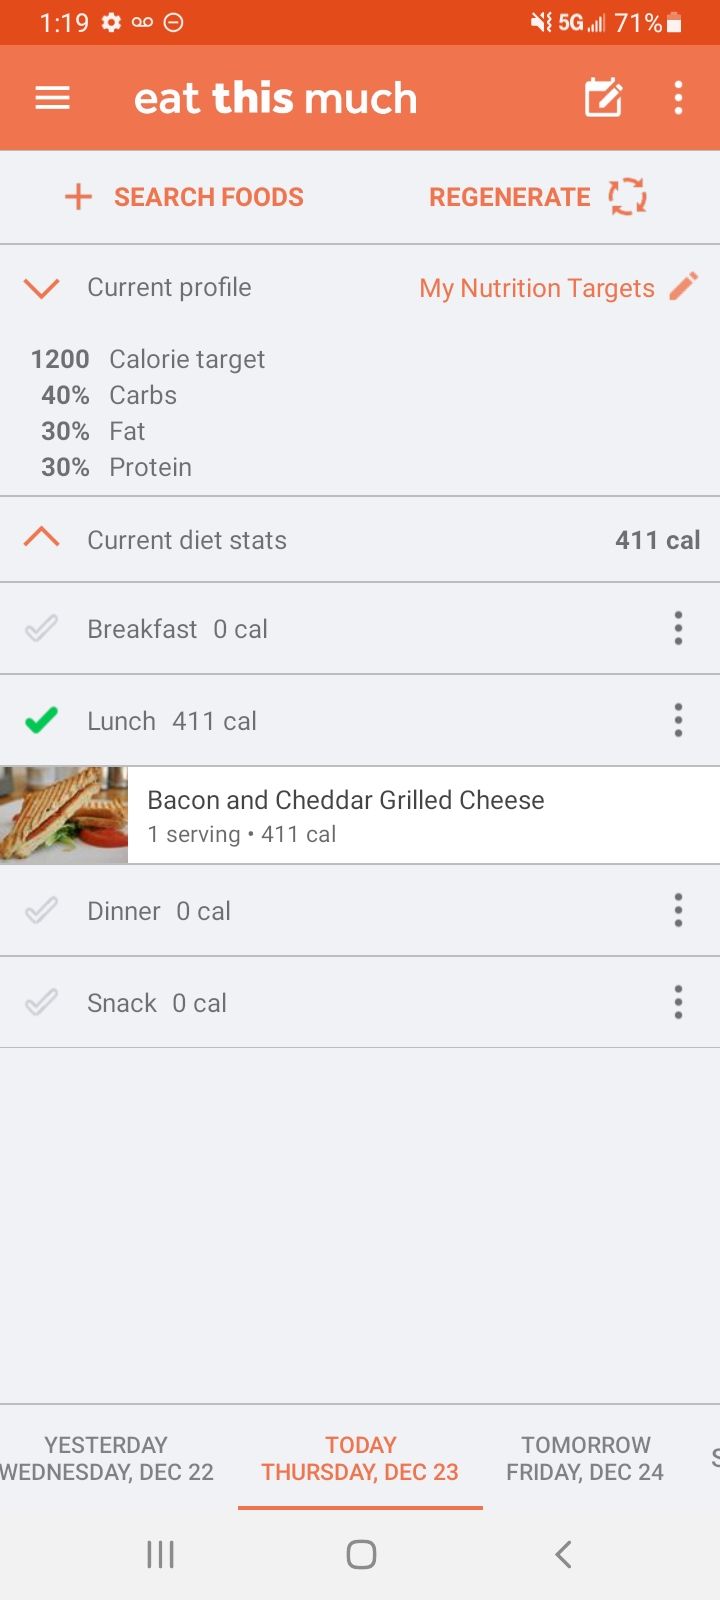 The recipe has now been documented in our Eat This Much calorie tracker.